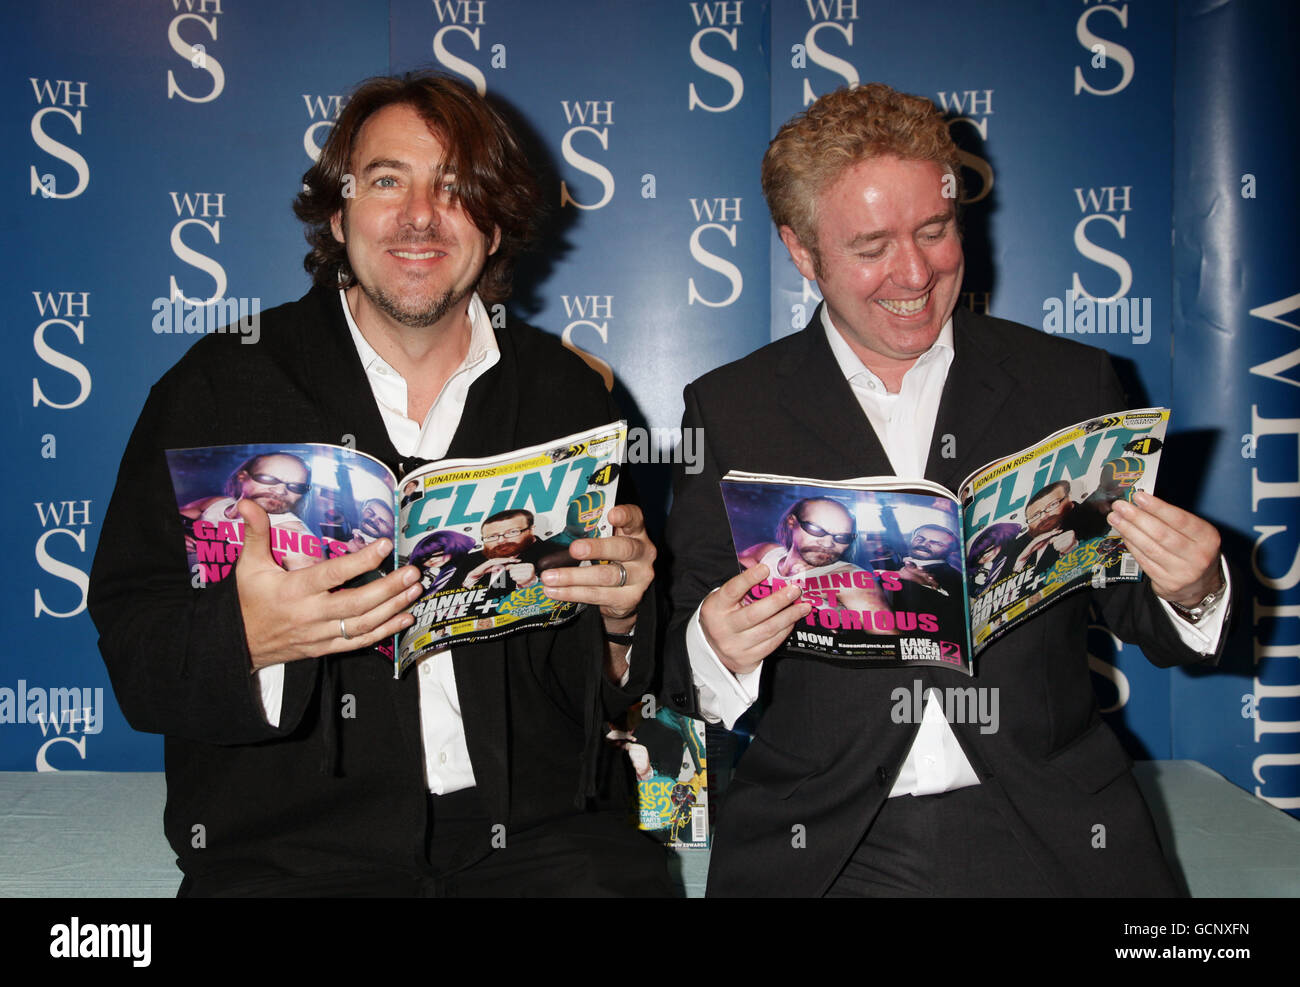 Comic book writer Mark Millar (right) and Jonathan Ross at a photocall and signing session to launch CLiNT magazine, at WHSmiths in Victoria Station, central London. Stock Photo